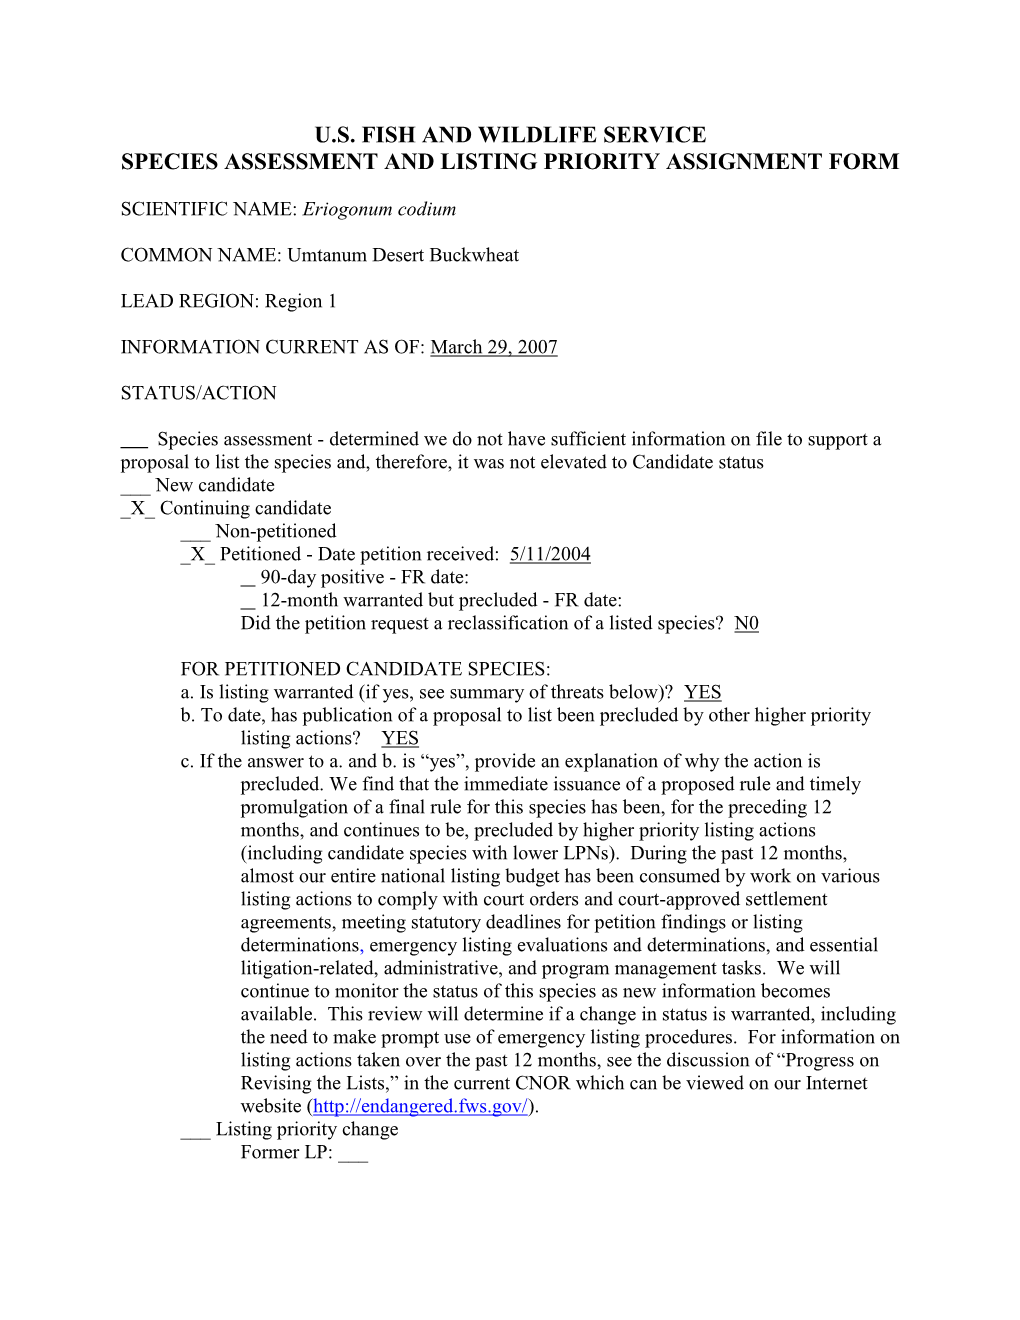 U.S. Fish and Wildlife Service Species Assessment and Listing Priority Assignment Form